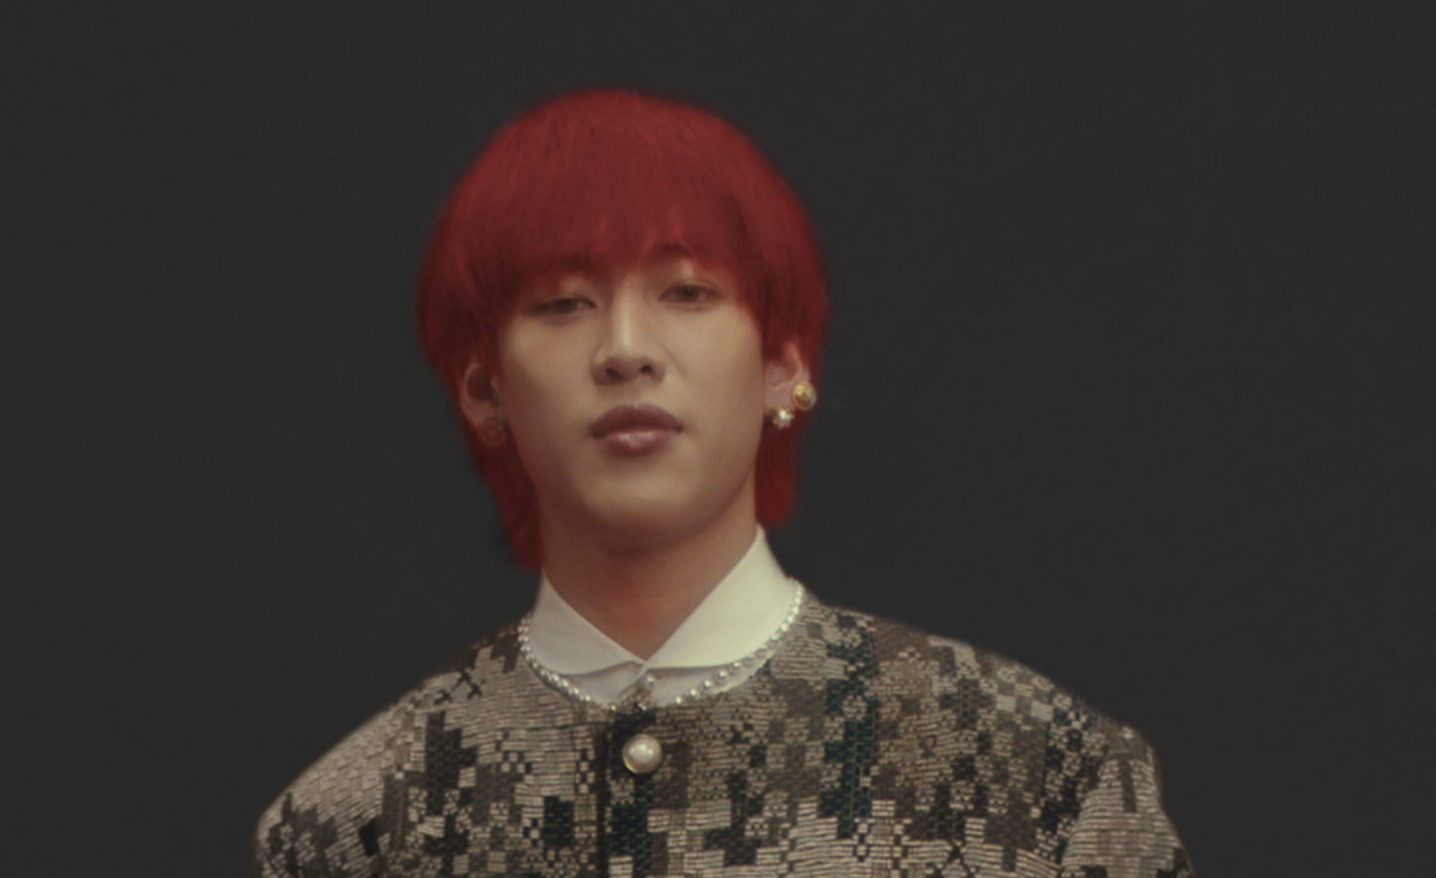 BamBam, with vibrant red hair, clad in a pixel-patterned Louis Vuitton jacket, exudes contemporary style.